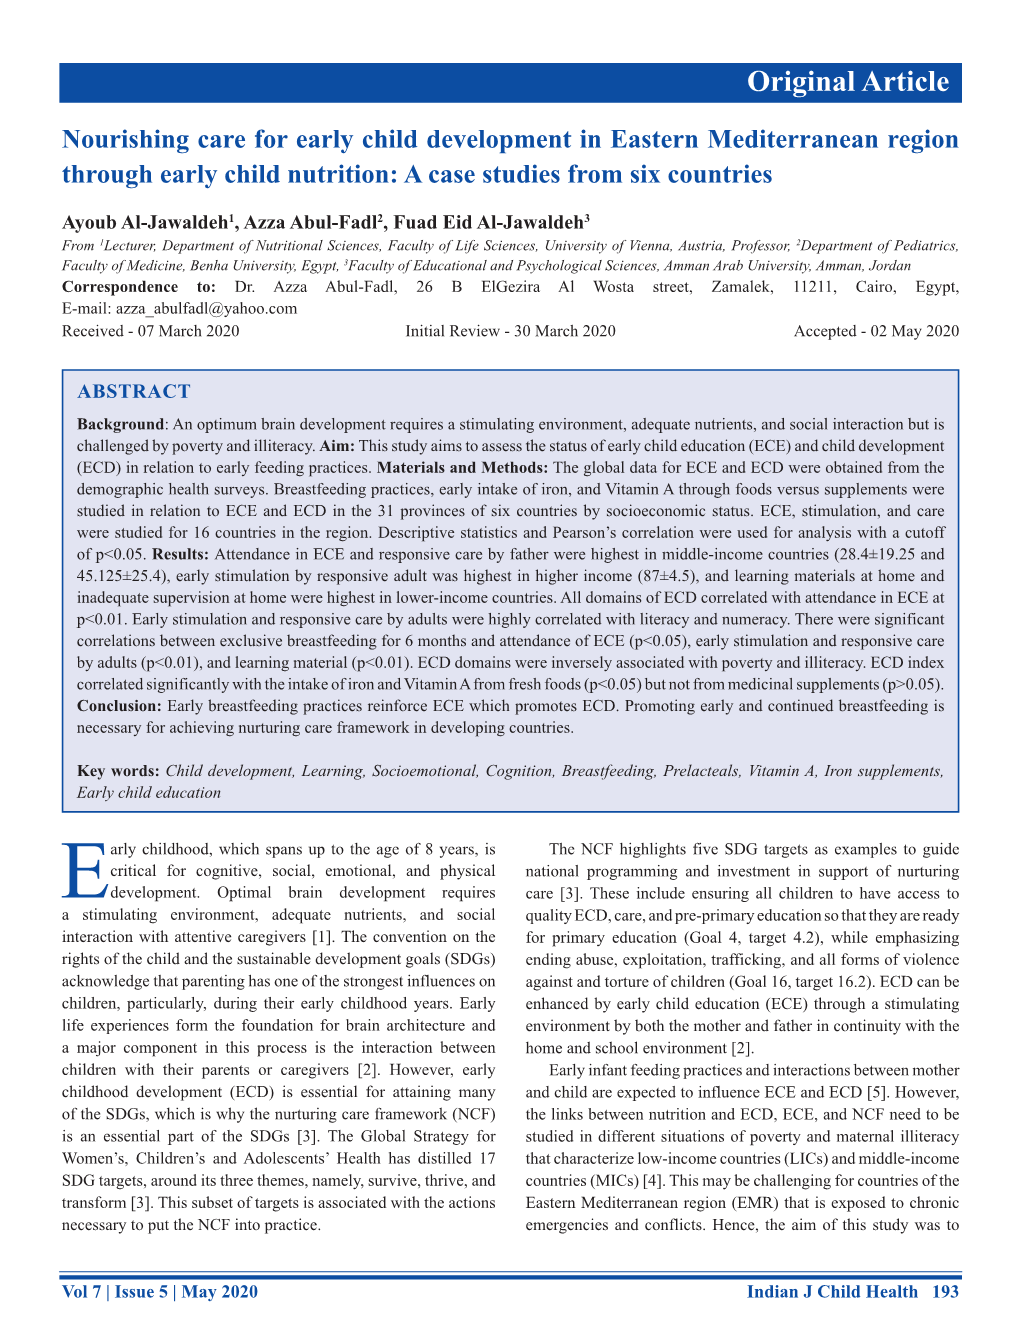 Nourishing Care for Early Child Development in Eastern Mediterranean Region Through Early Child Nutrition: a Case Studies from Six Countries